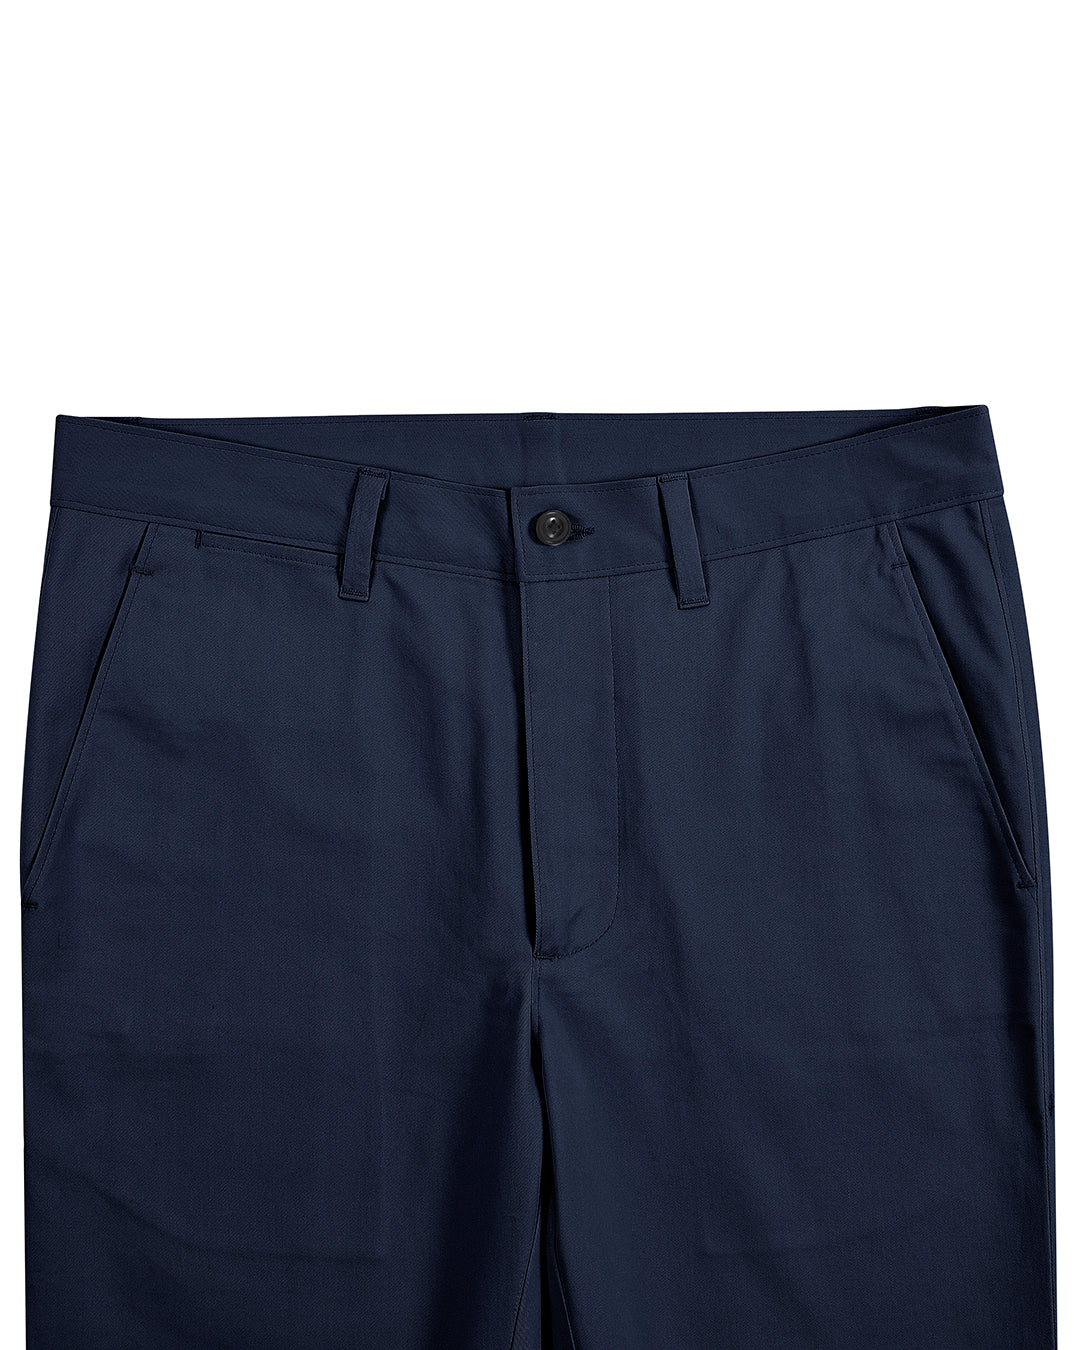 Front view of custom Genoa Chino pants for men by Luxire in midnight blue